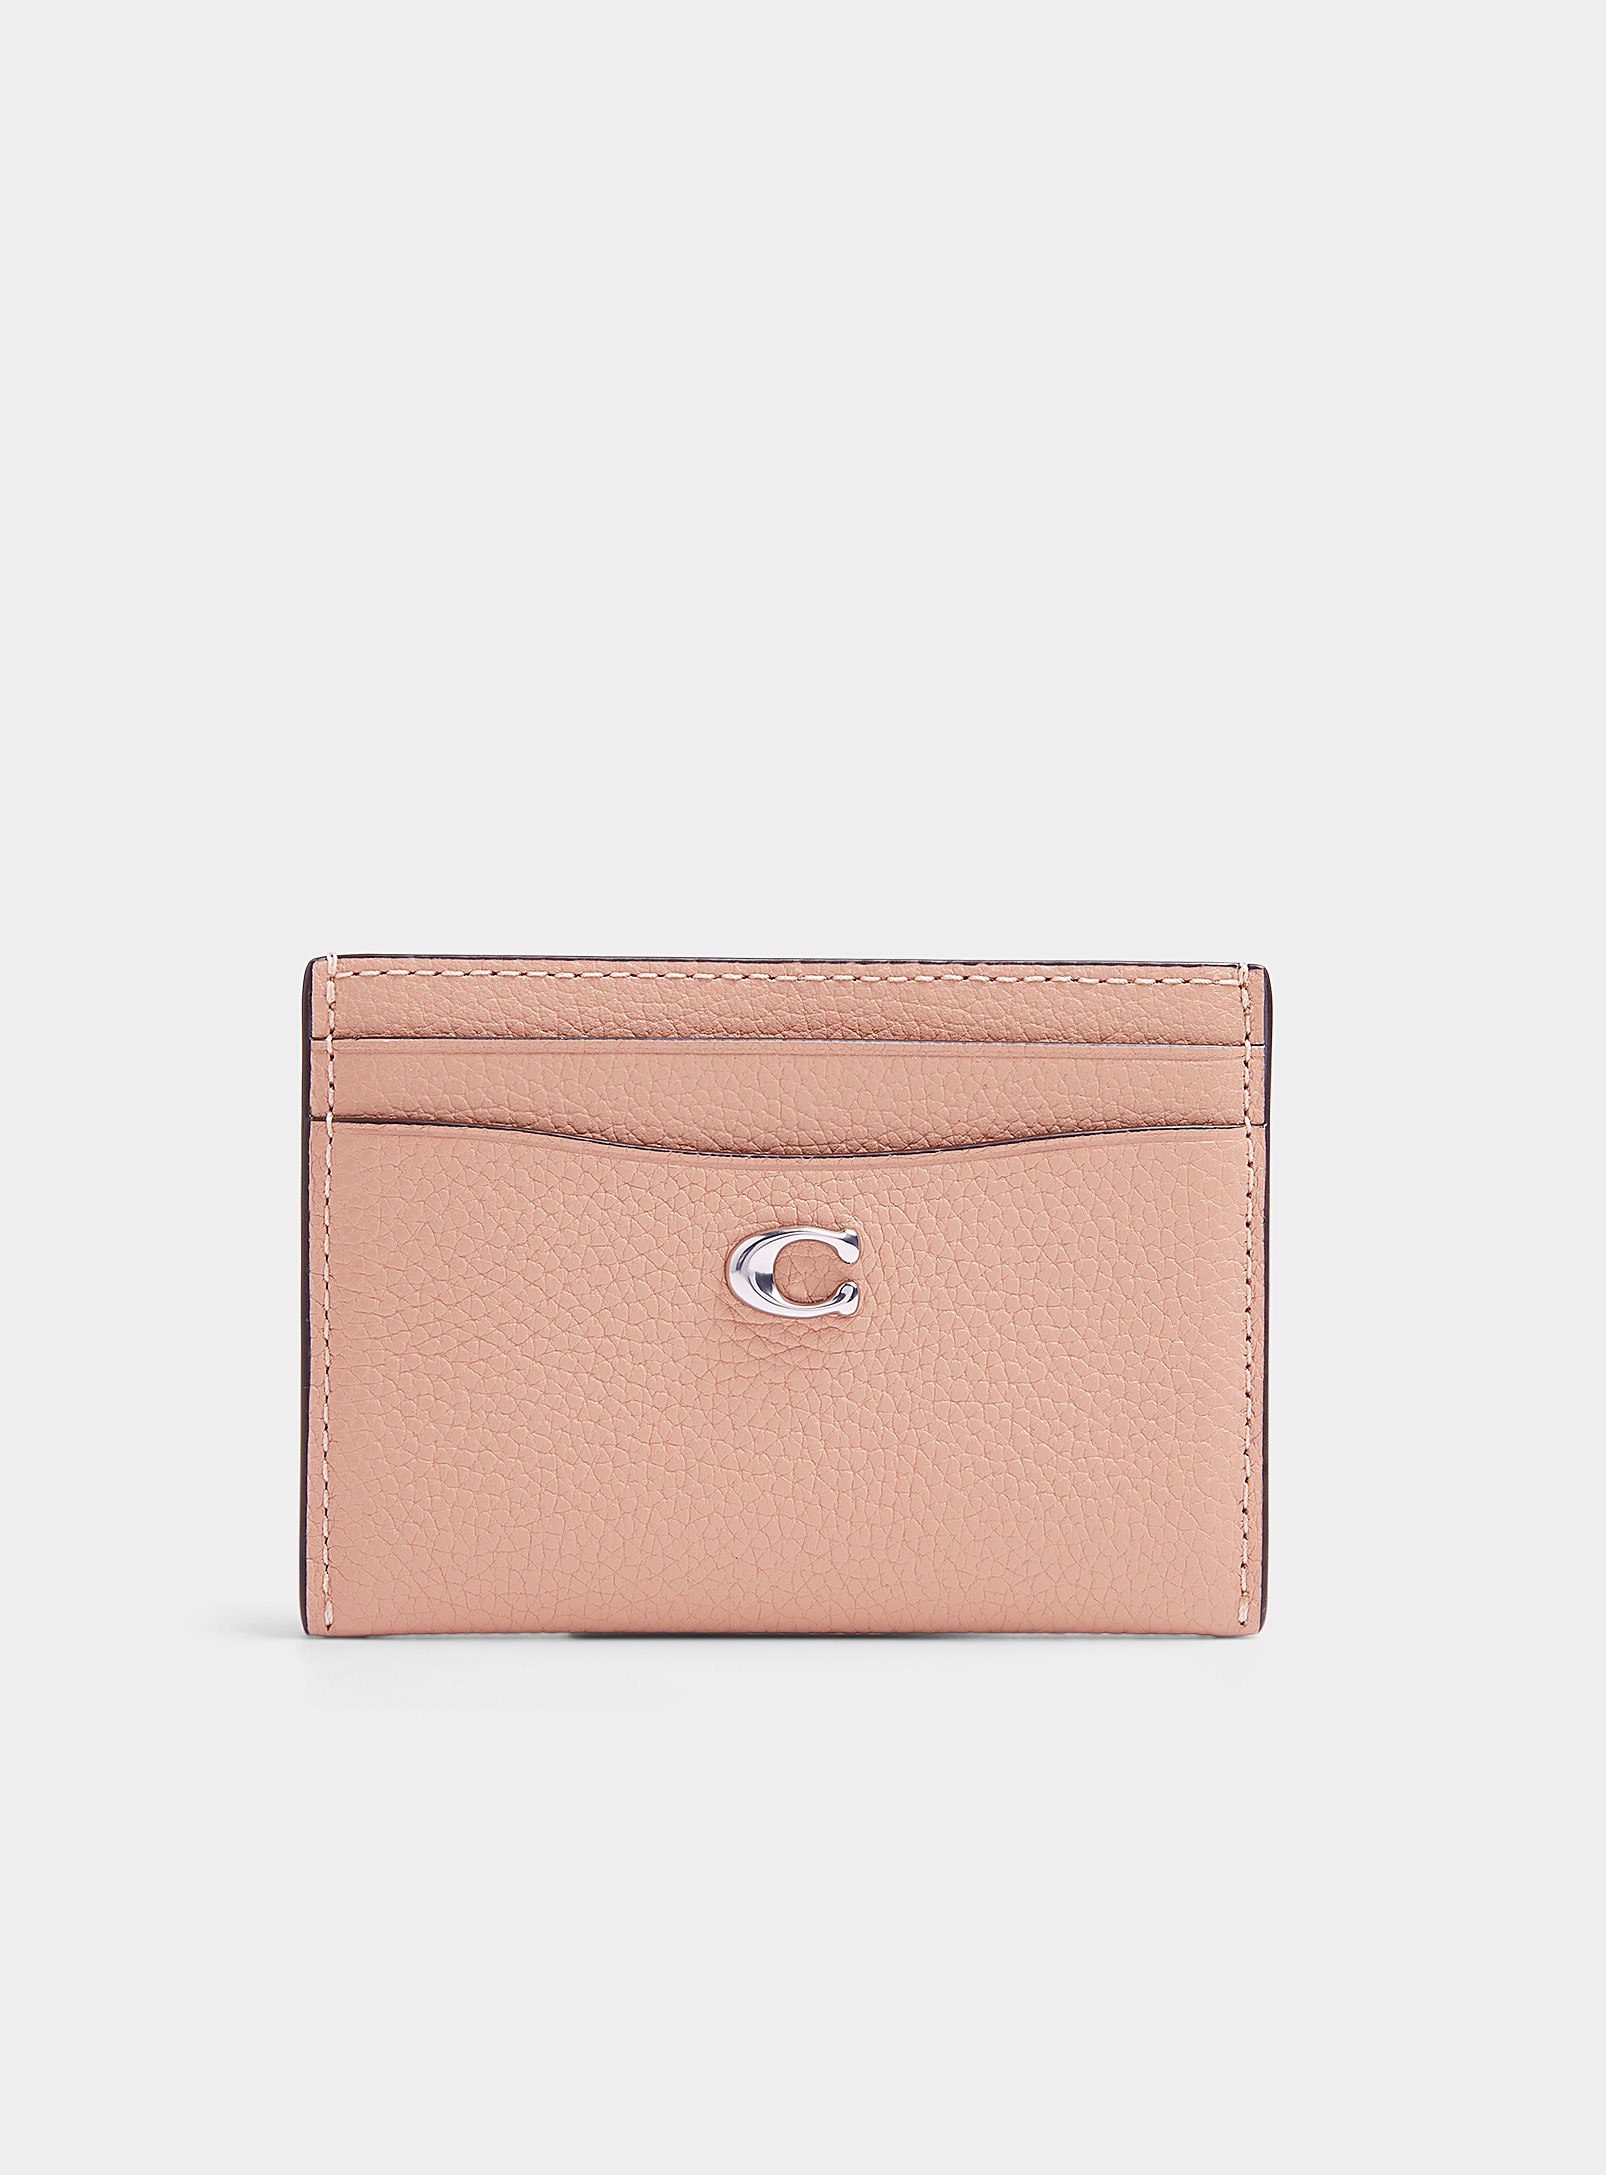 Coach Monogram Leather Card Case In Dusky Pink